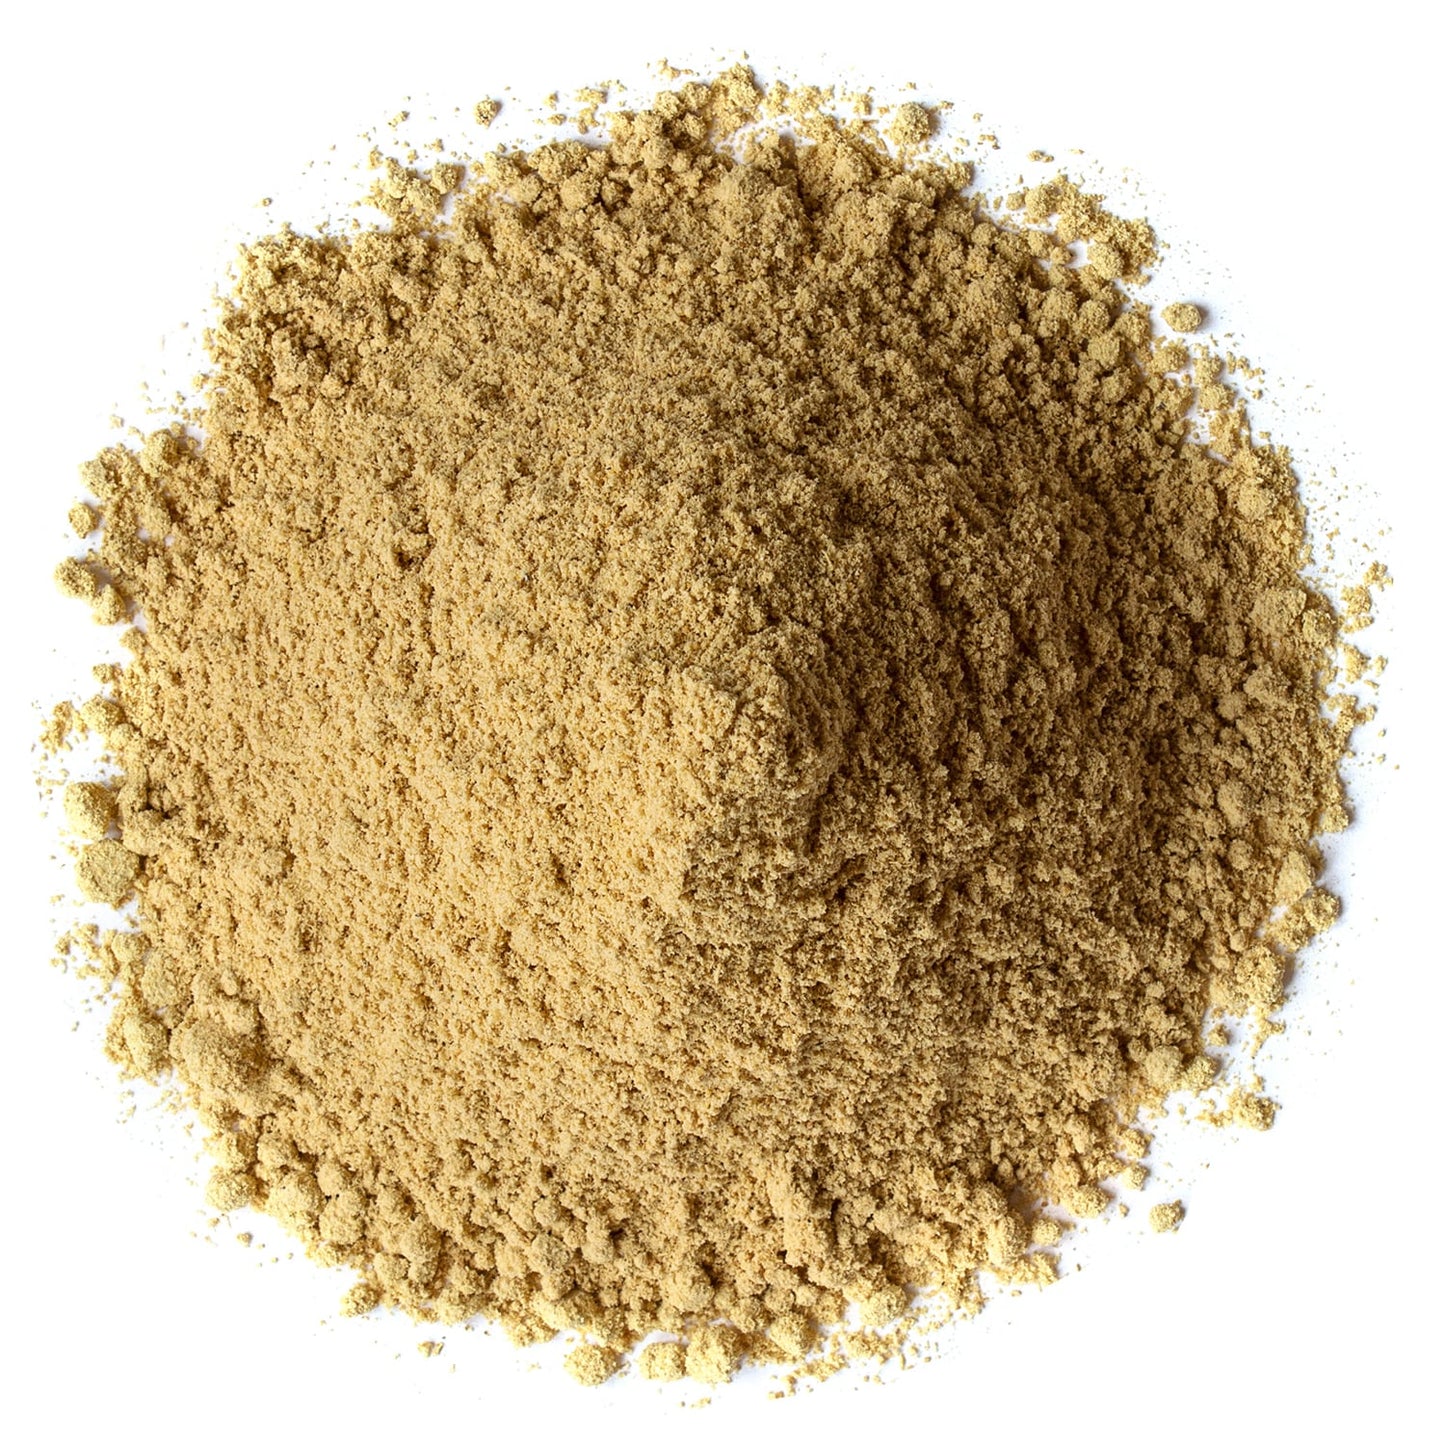 Ginger Powder — Non-GMO Verified, Finely Ground Dried Ginger Root, Pure, Kosher, Vegan, Sirtfood. Bulk Ginger Spice with Spicy-Sweet Flavor. Great for Cooking Baked Goods, Tea, Dressings, and Sauces